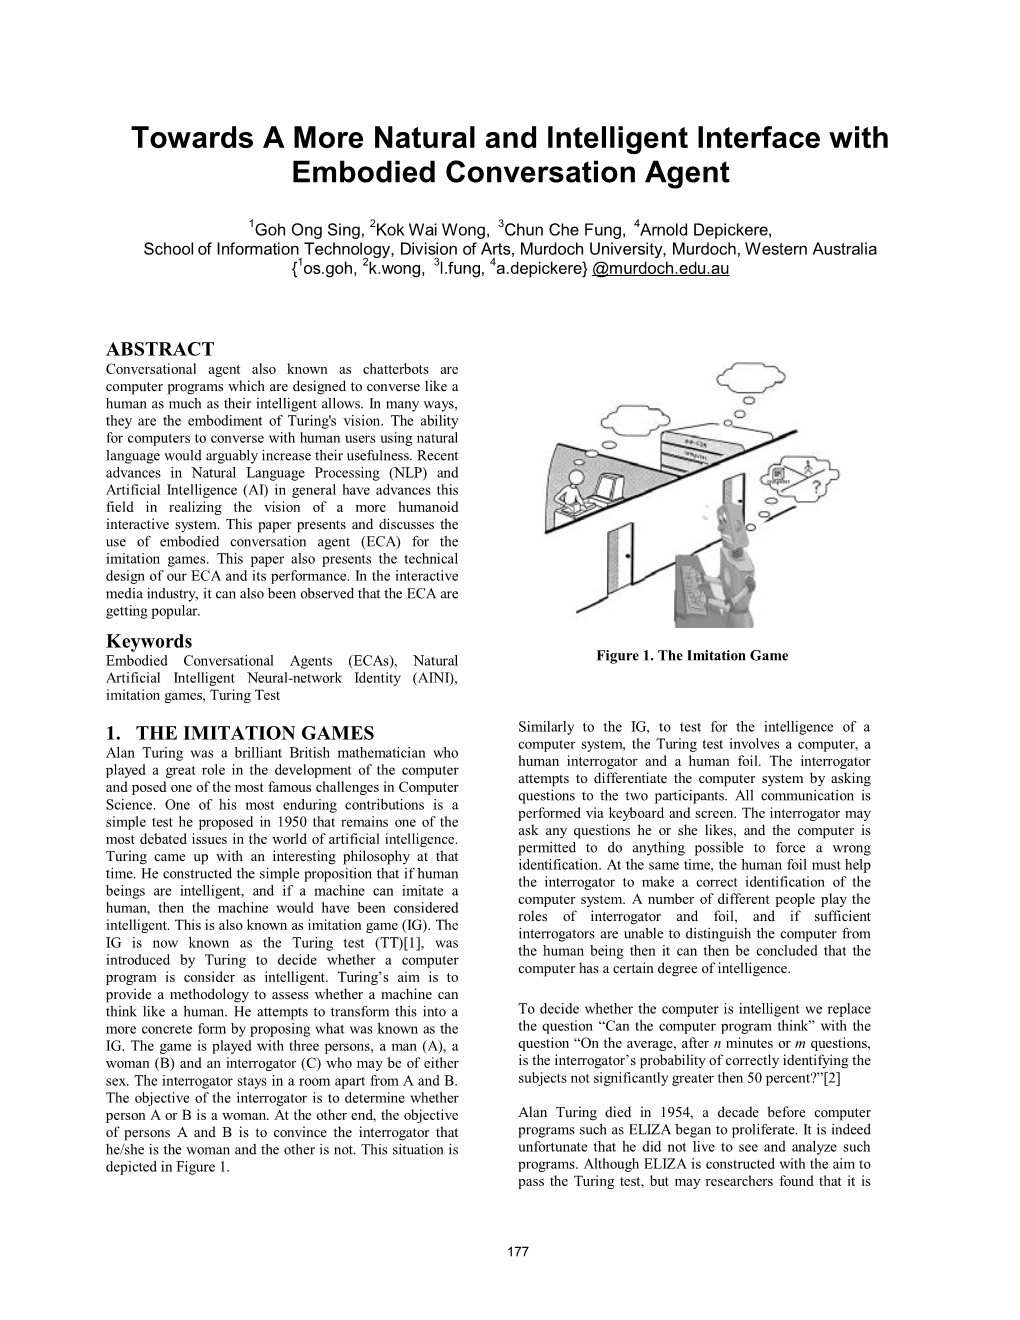 Towards a More Natural and Intelligent Interface with Embodied Conversation Agent